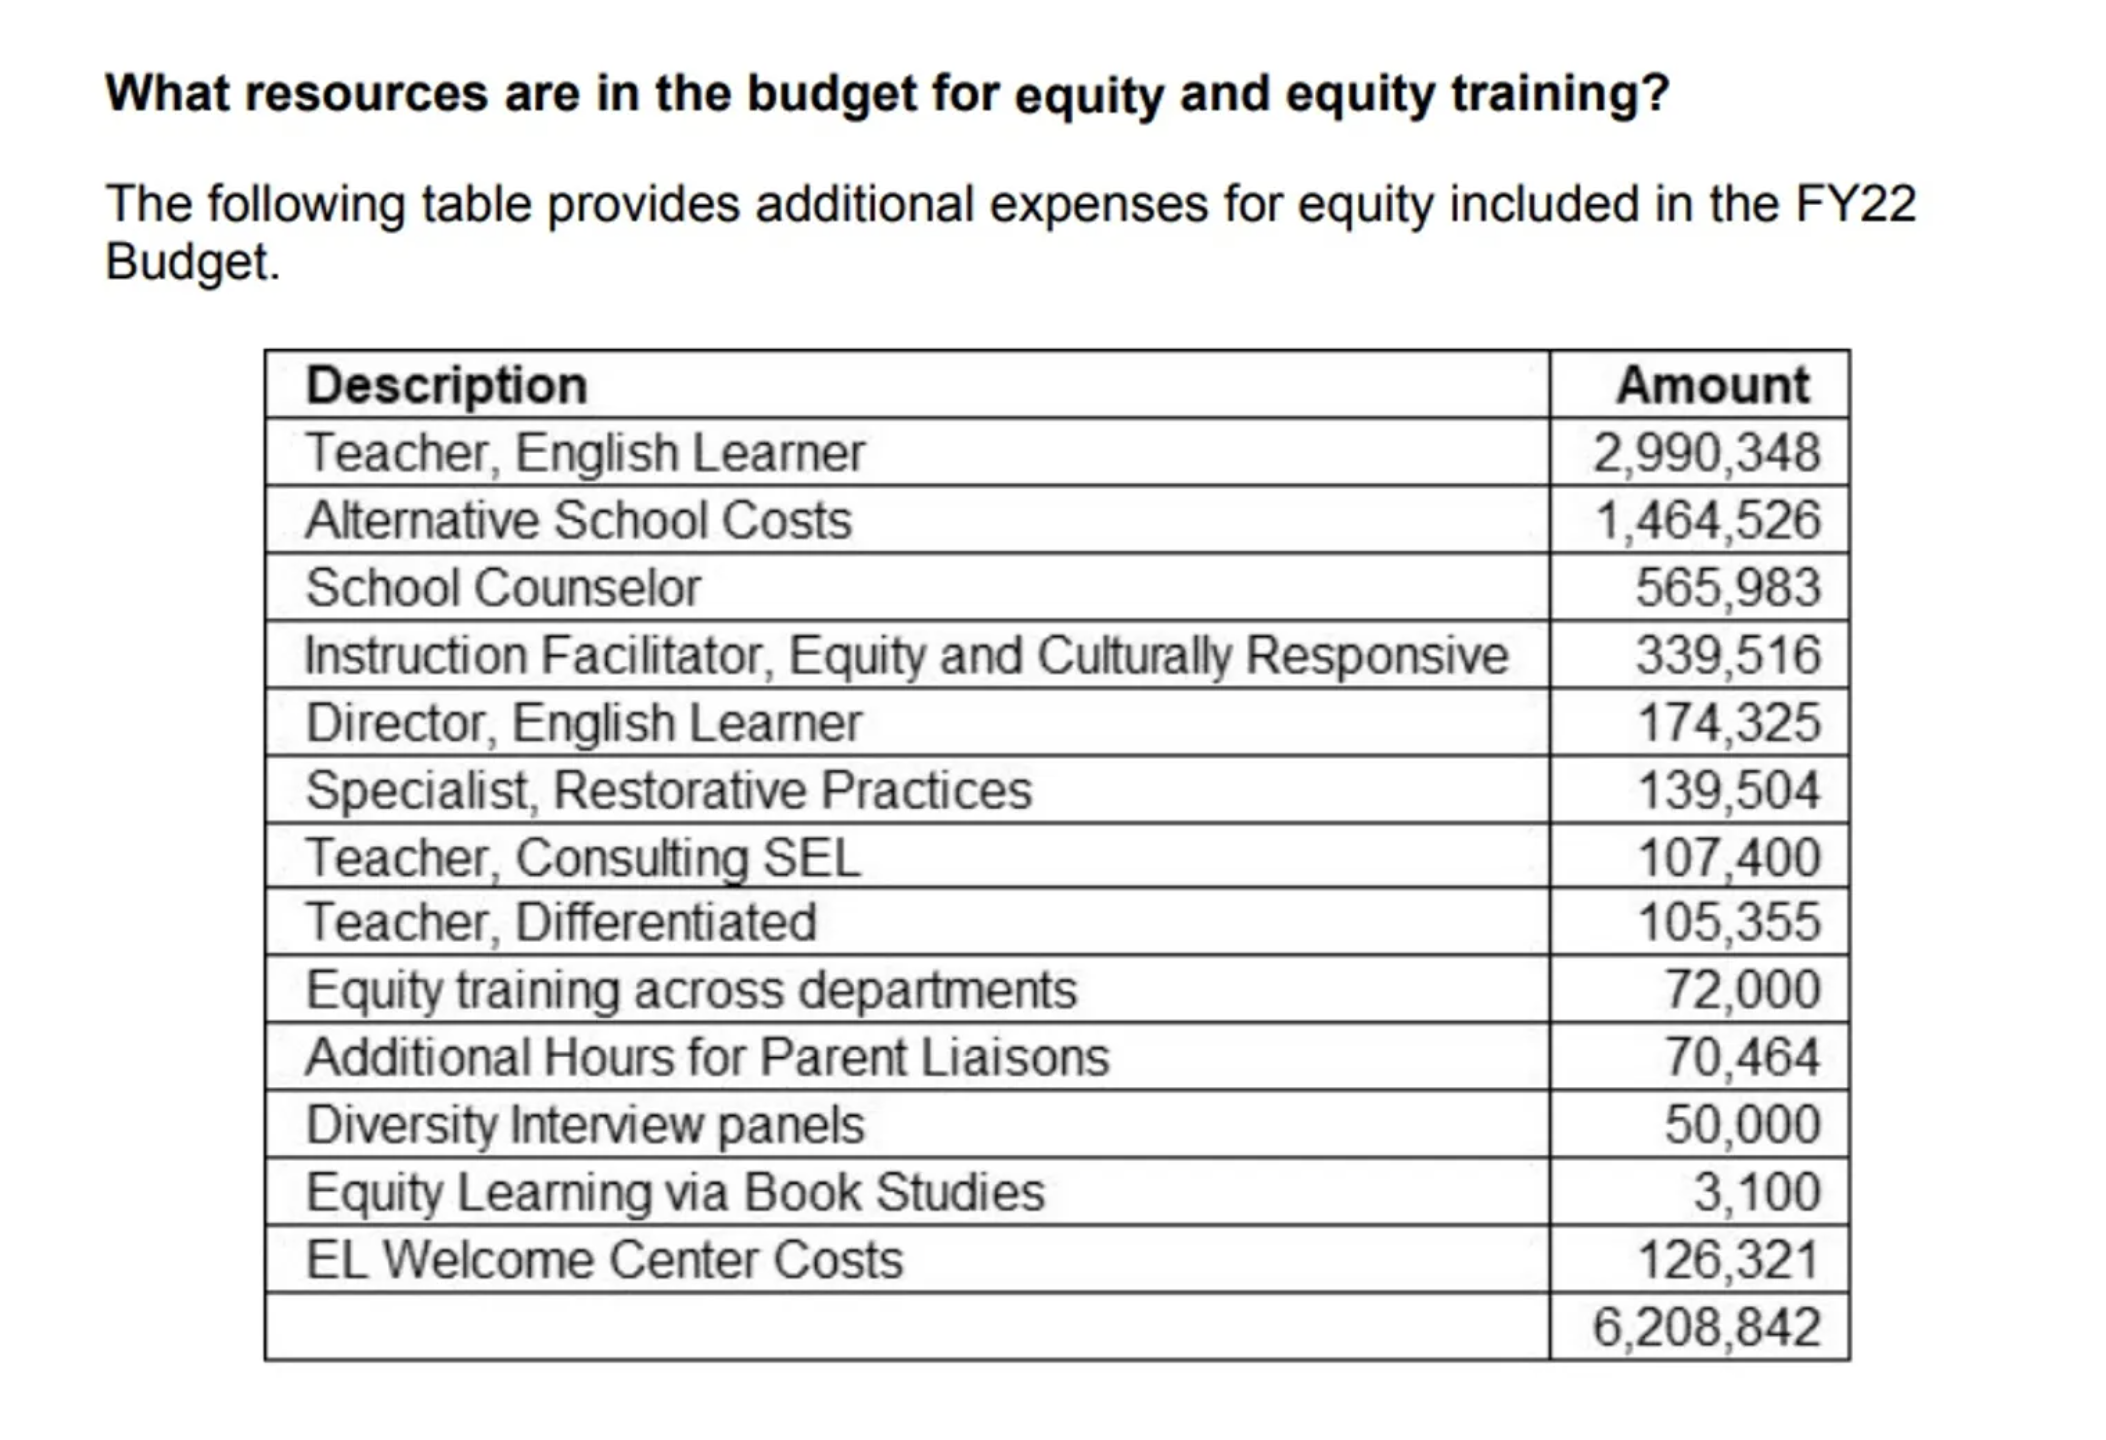 Loudon County Board of Supervisors Fiscal year BUdget 2022 Resources needed for Equity Training